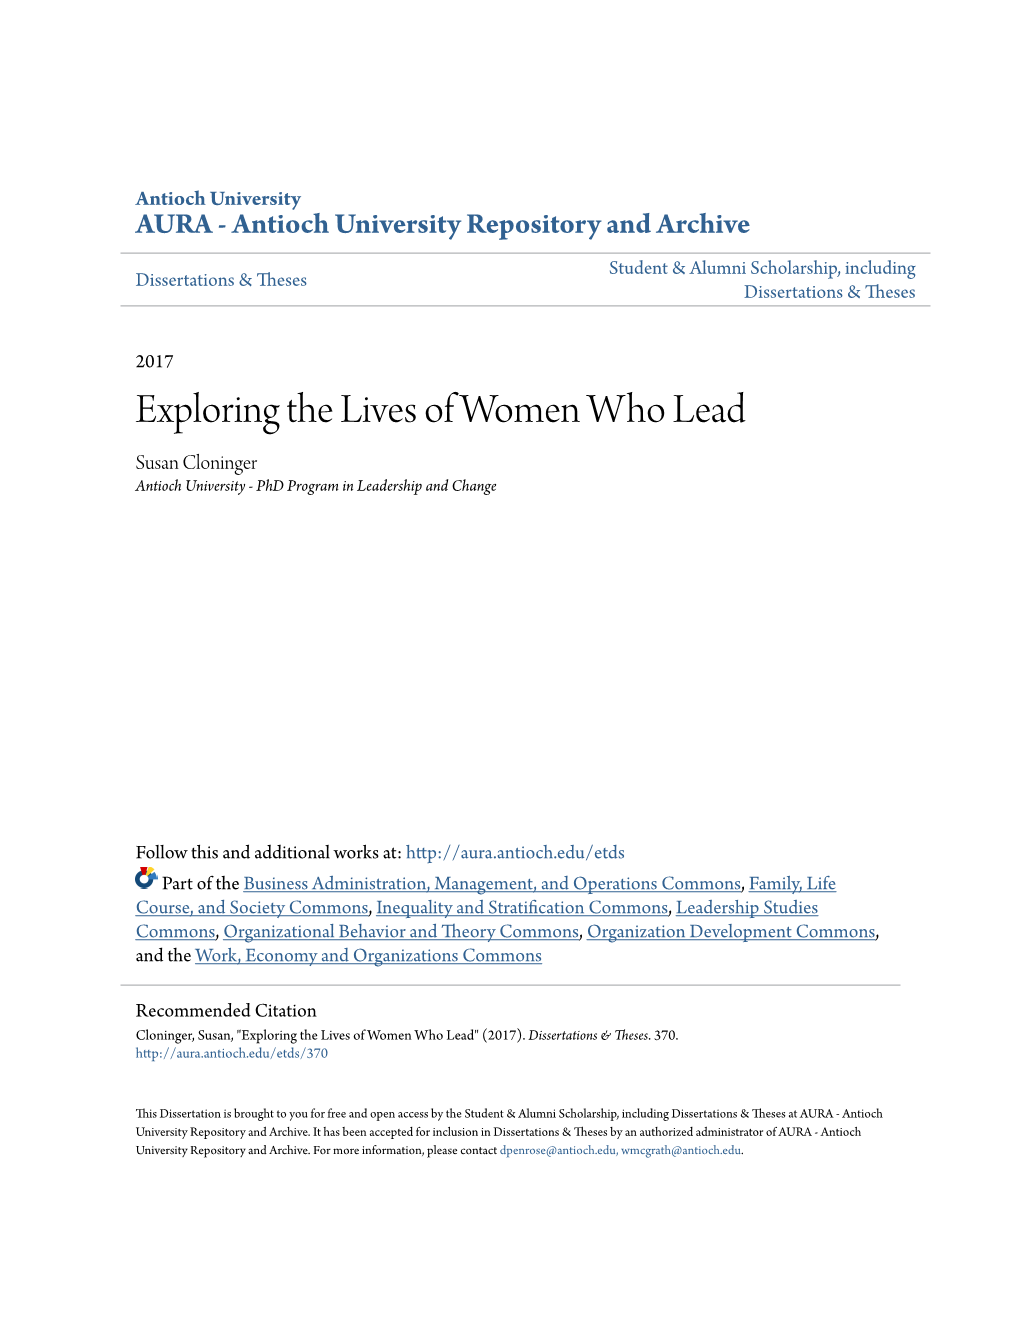 Exploring the Lives of Women Who Lead Susan Cloninger Antioch University - Phd Program in Leadership and Change